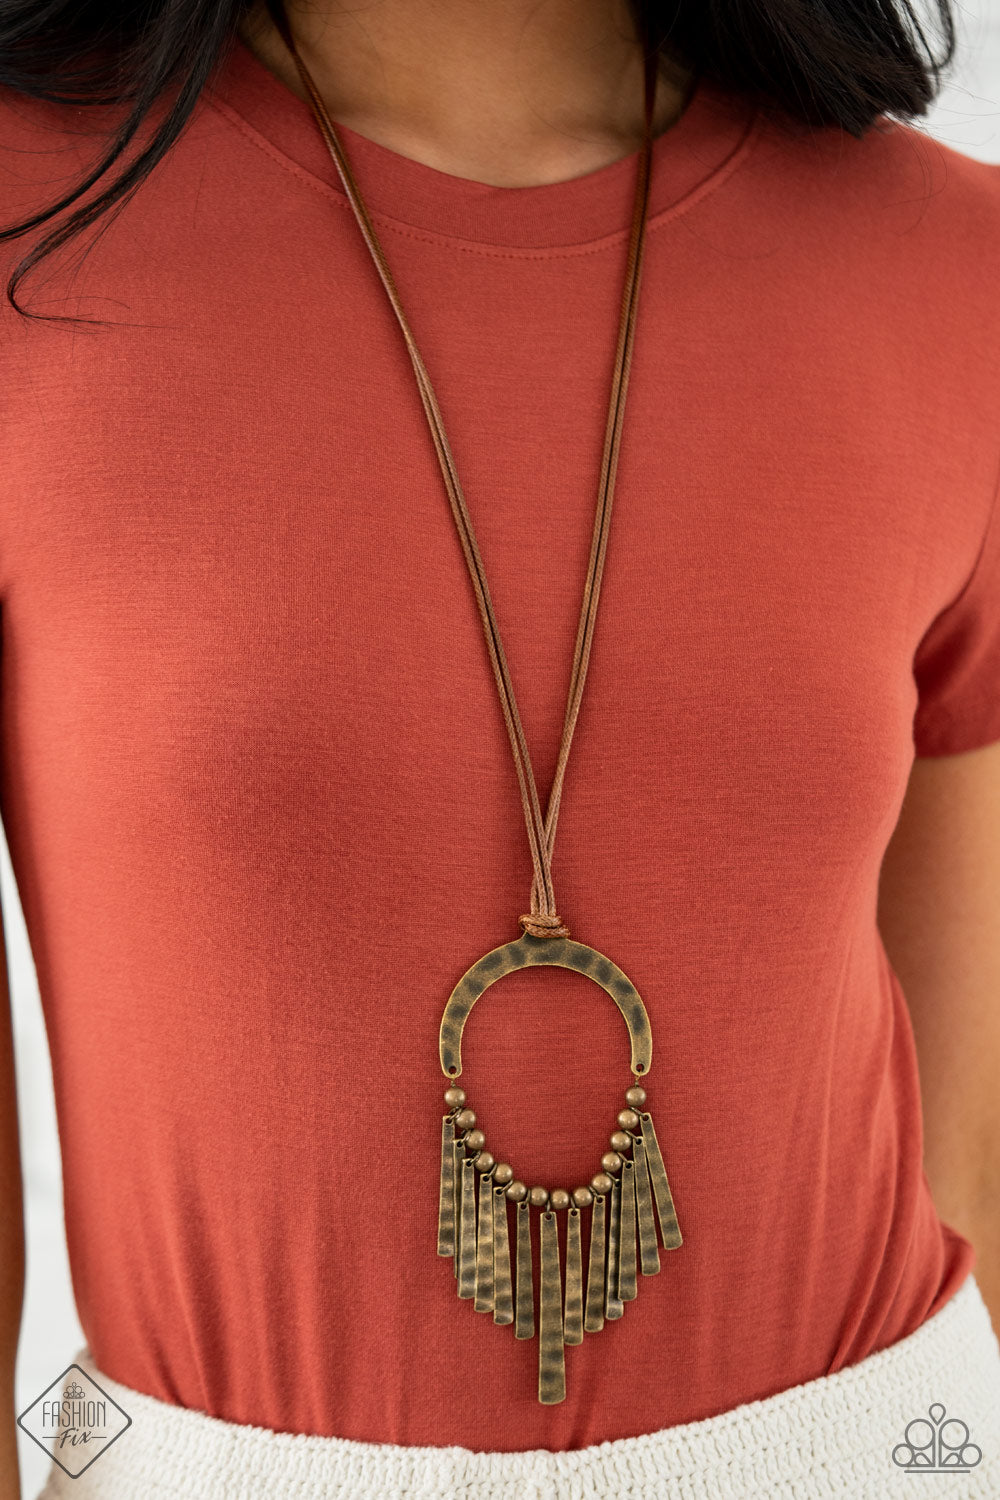 You Wouldnt FLARE!
Brass Necklace - Daria's Blings N Things